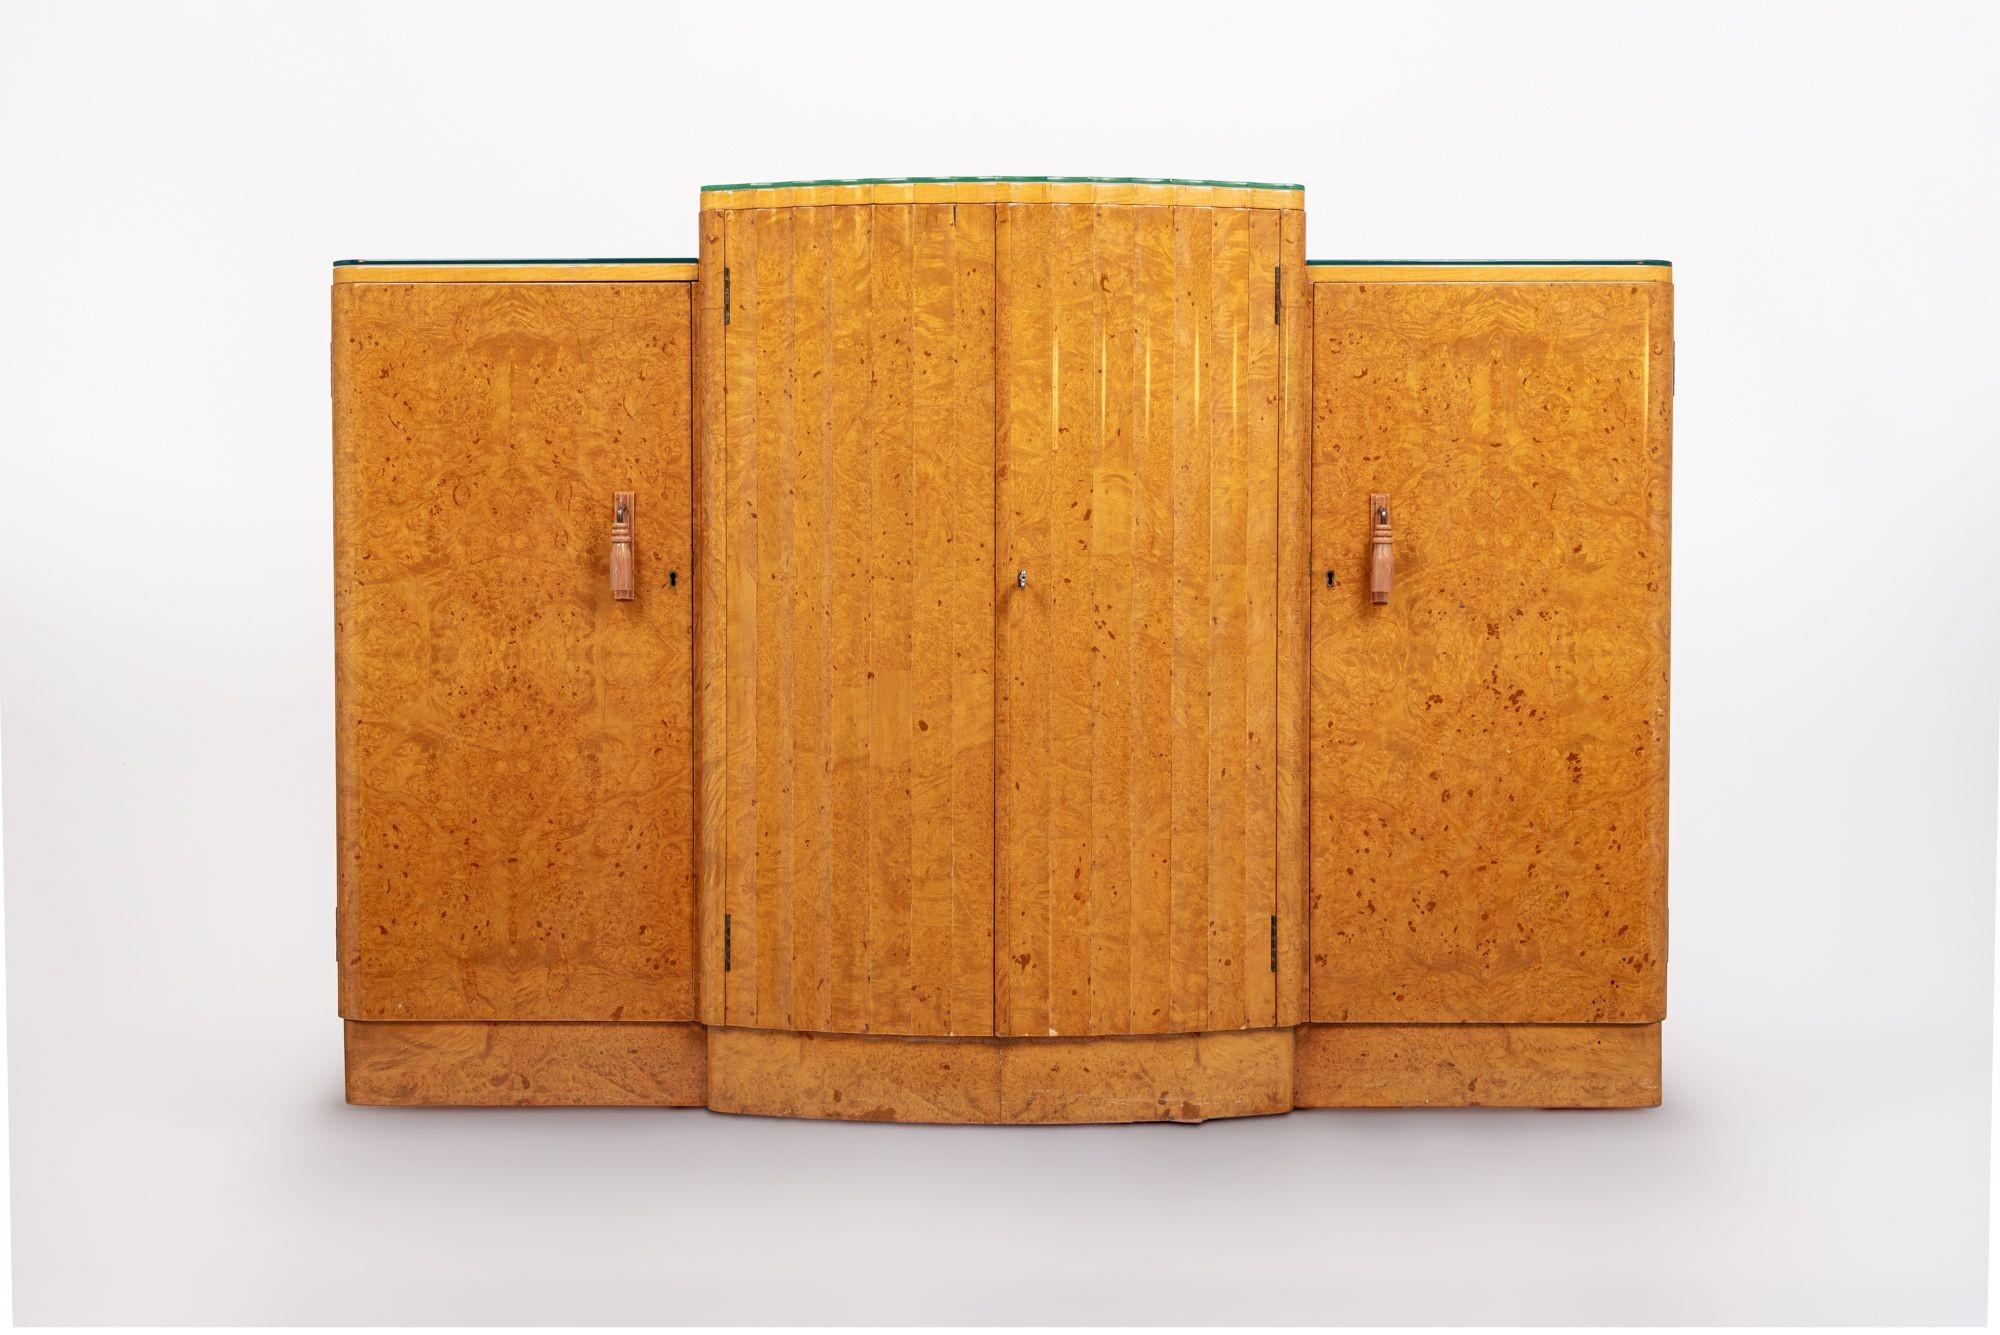 This exquisite English Art Deco maple wood bar cabinet or sideboard is attributed to Harry & Lou Epstein and is circa 1930. The cabinet is expertly handcrafted and features stunning birdseye maple and a “skyscraper” breakfront design with a taller